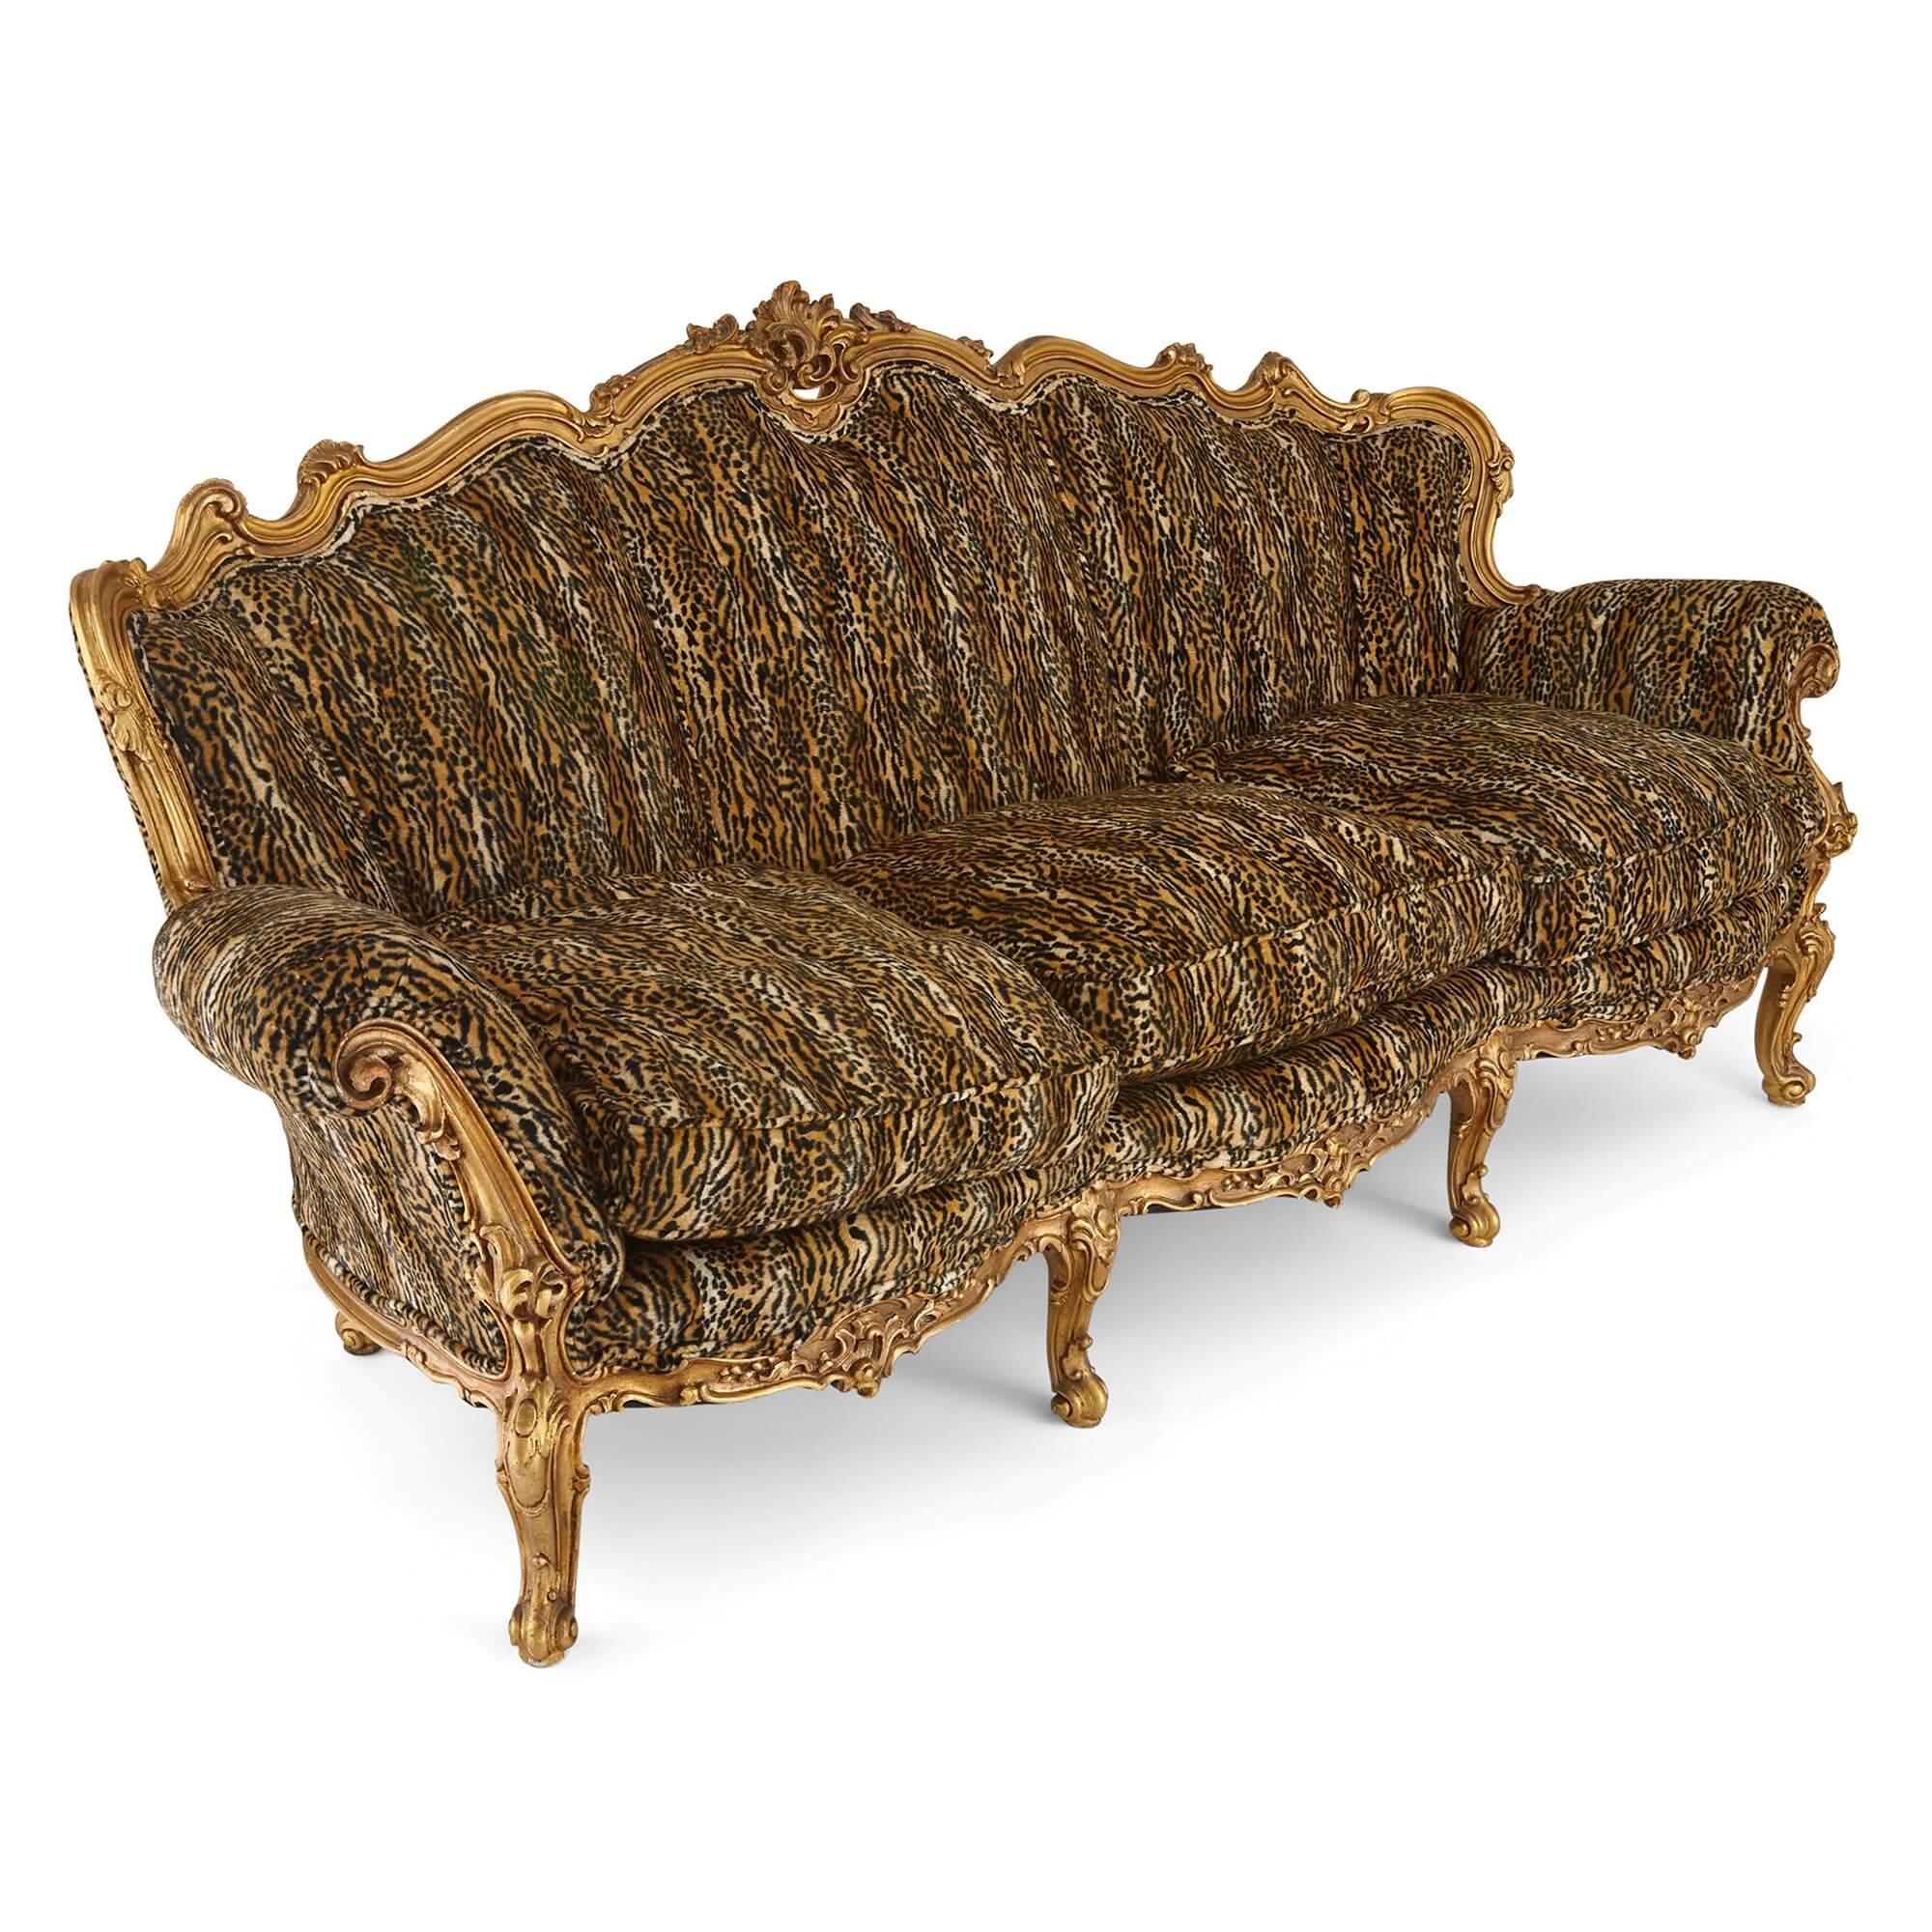 Large French giltwood ornate antique sofa
French, Early 20th Century
Height 100cm, width 214cm, depth 75cm

Upholstered with lavish decorative leopard skin patterns, this remarkably grand, luxurious, and ornate sofa is crafted from giltwood, and